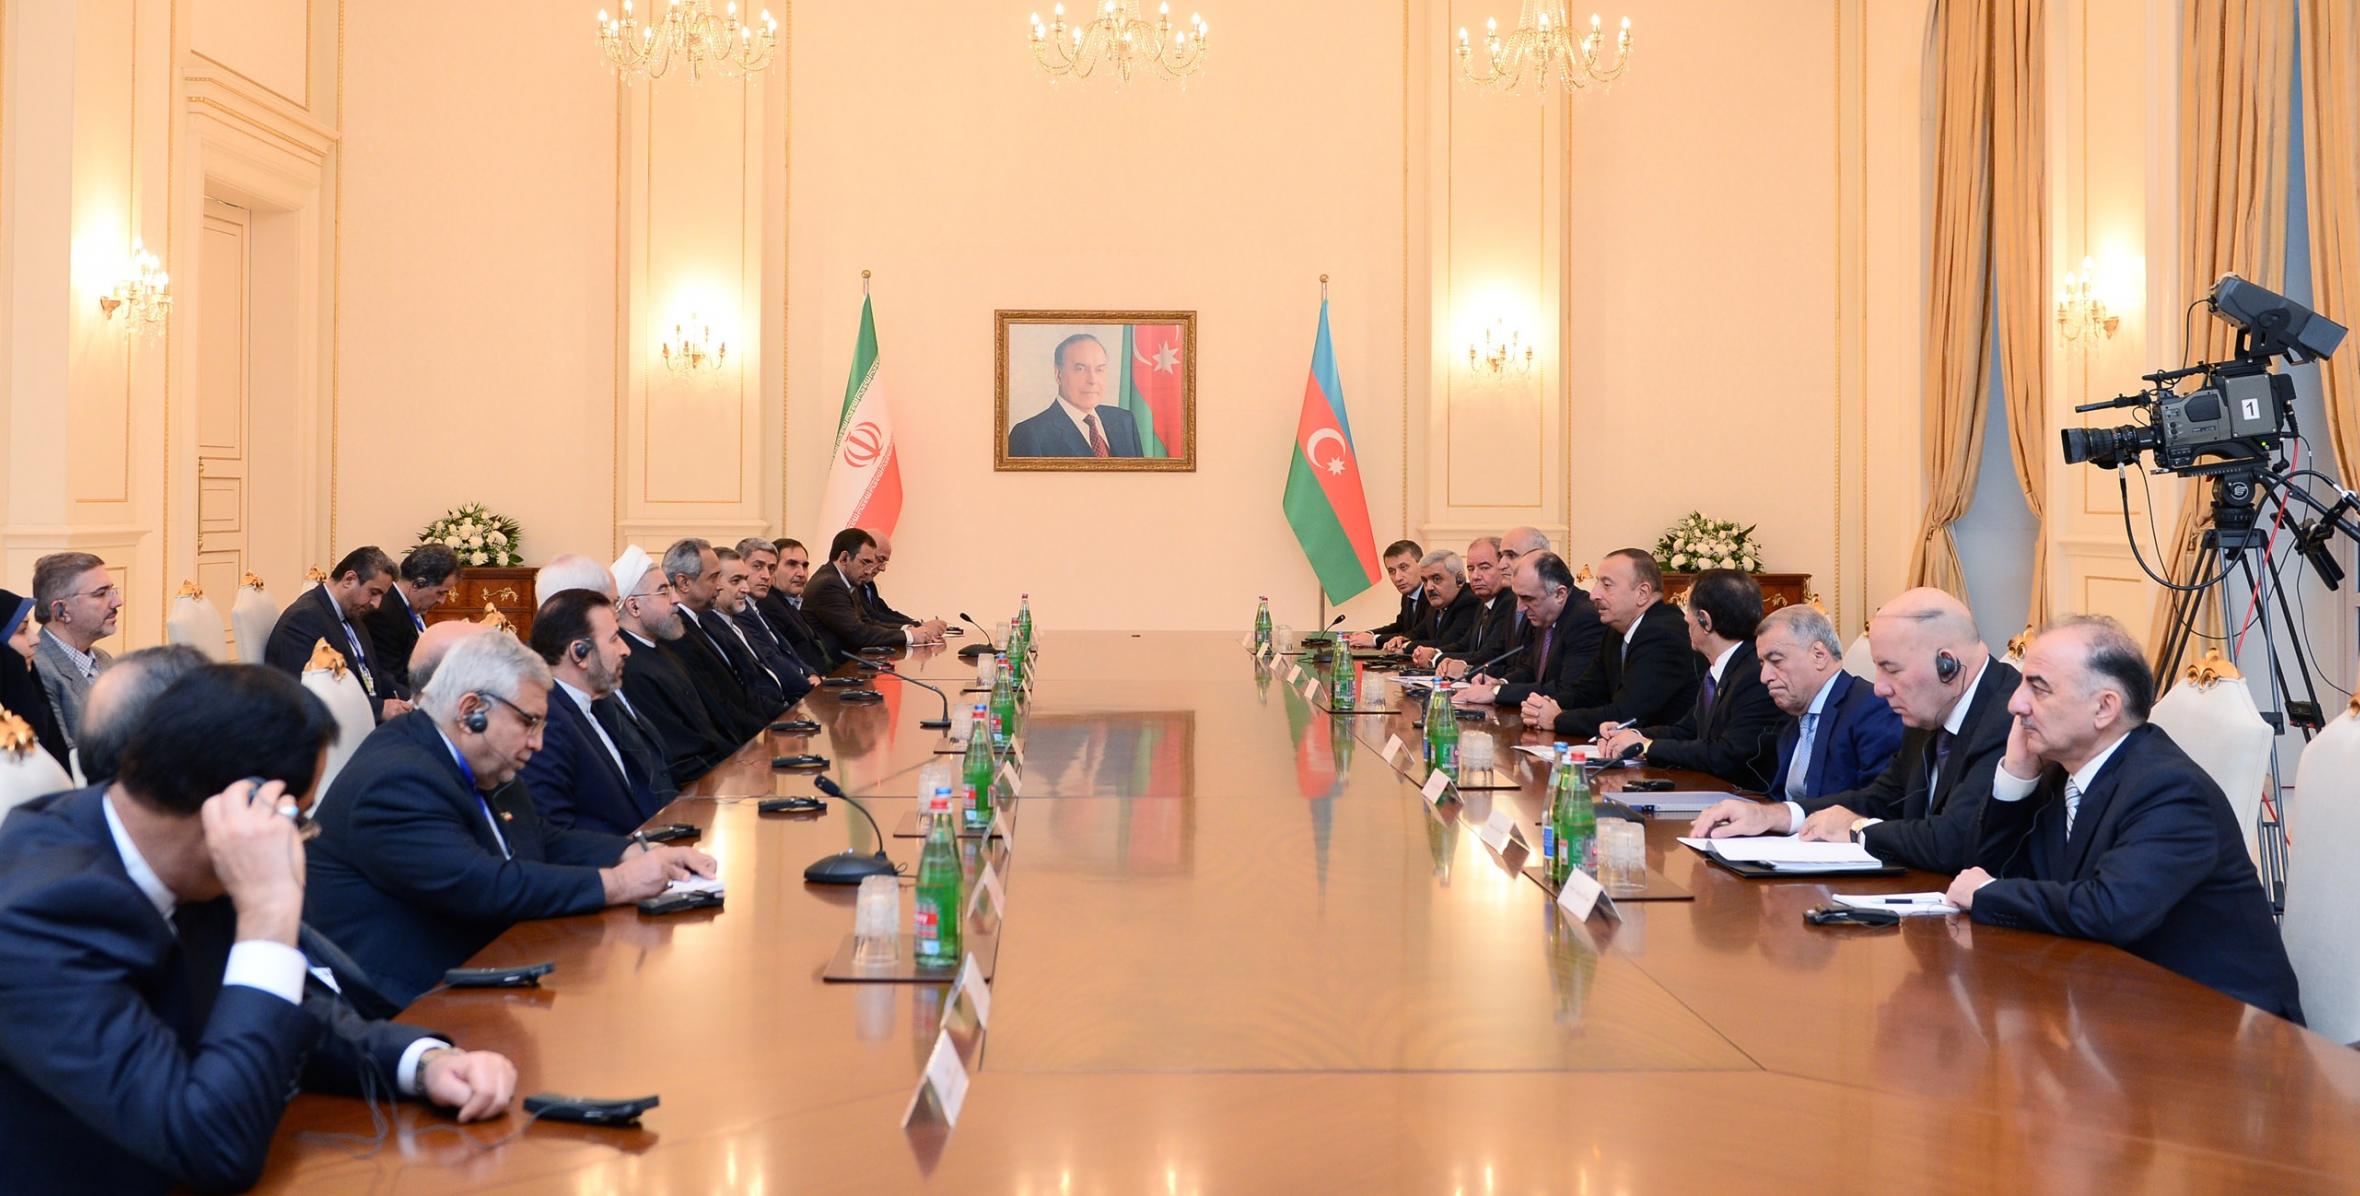 Ilham Aliyev and President of Iran Hassan Rouhani held an expanded meeting